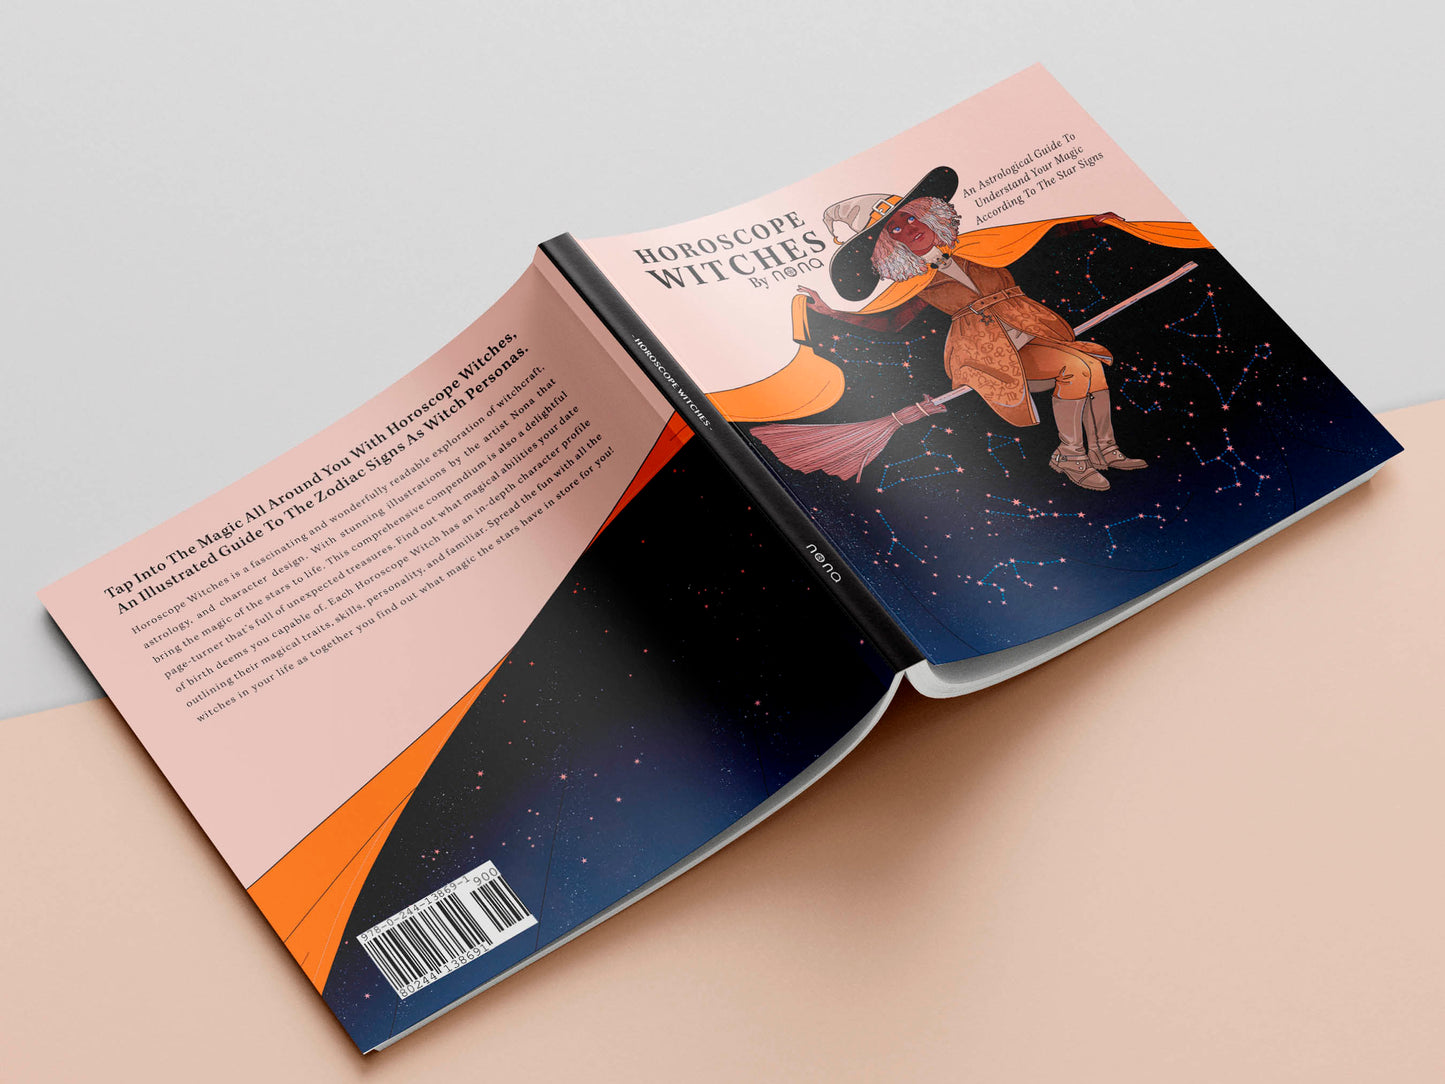 Book front and back cover a dark skinned witch flying on a broomstick with her cape flowing behind filled with the night sky zodiac consolations the title Horoscope Witches by nona, An astrological guide to understand your magic according to the star signs. 